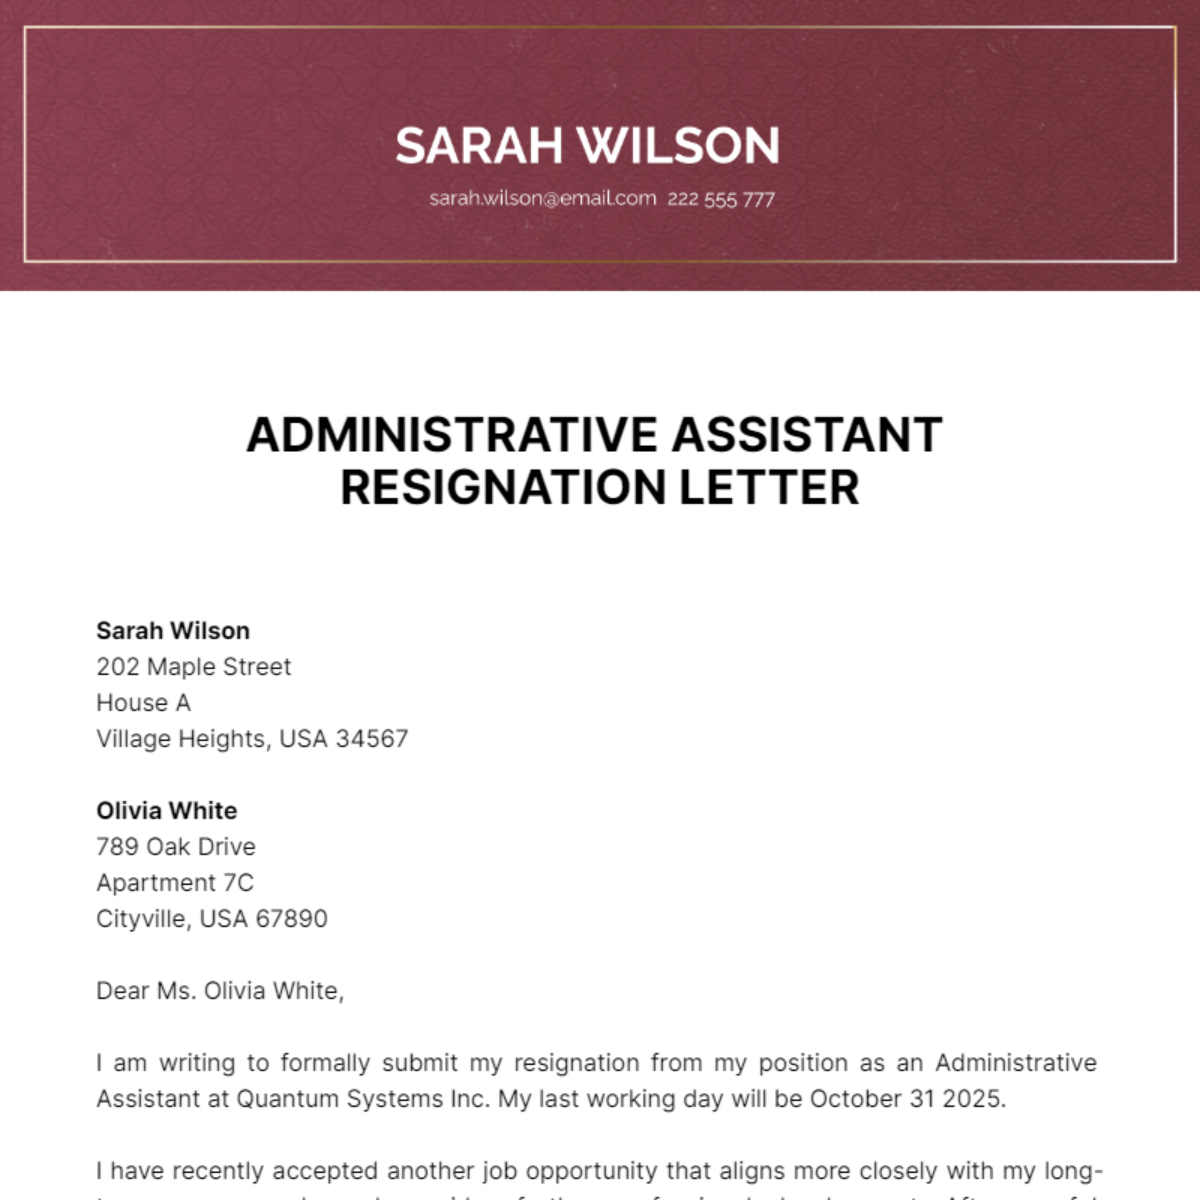 Free Administrative Assistant Resignation Letter Template